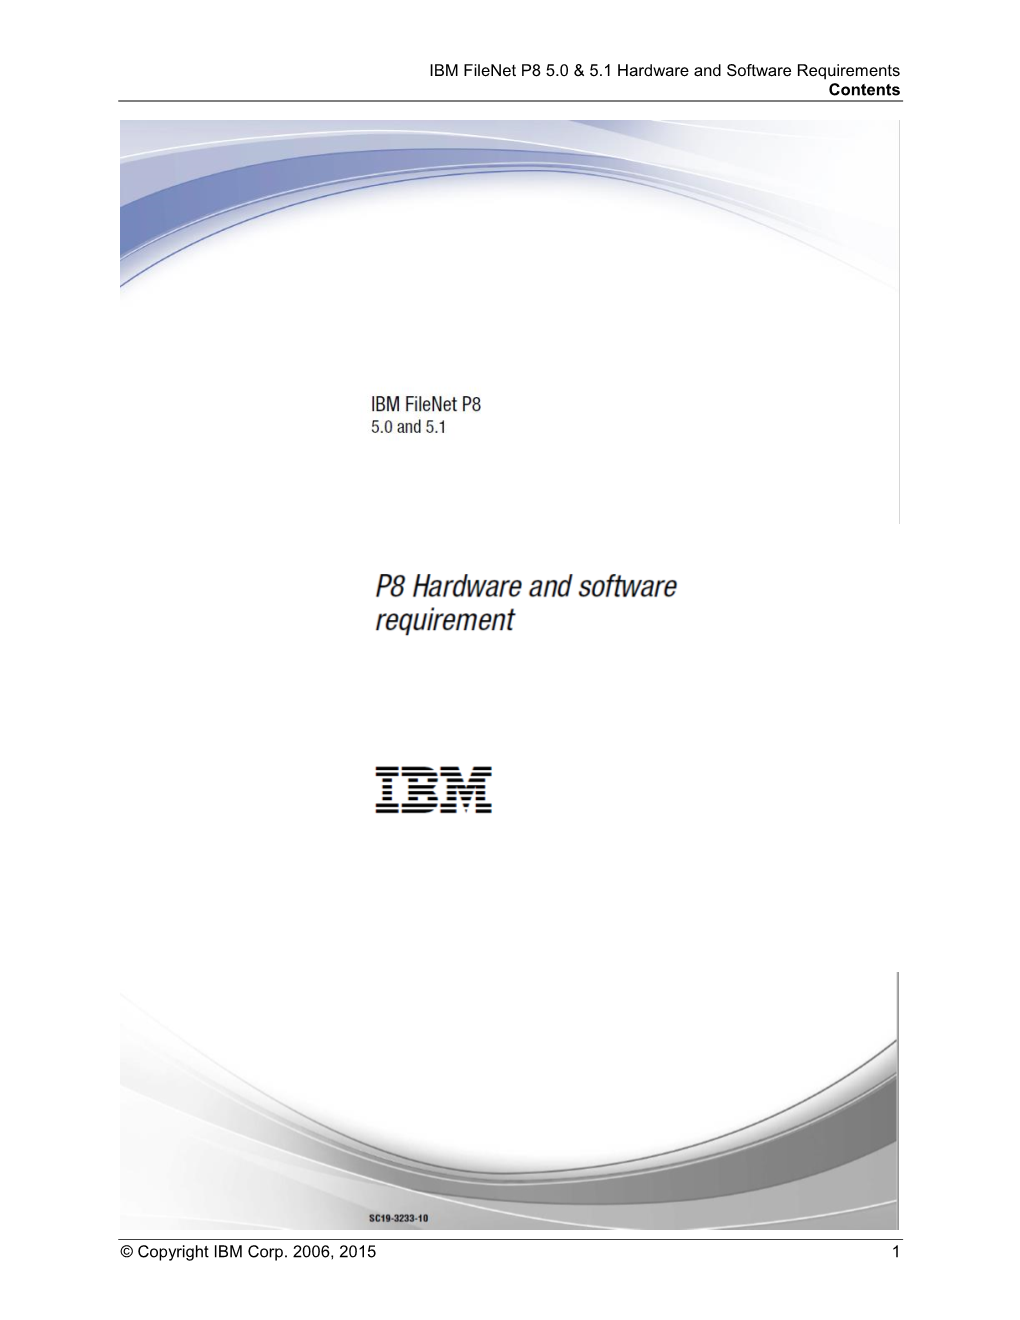 IBM Filenet P8 5.0 & 5.1 Hardware and Software Requirements